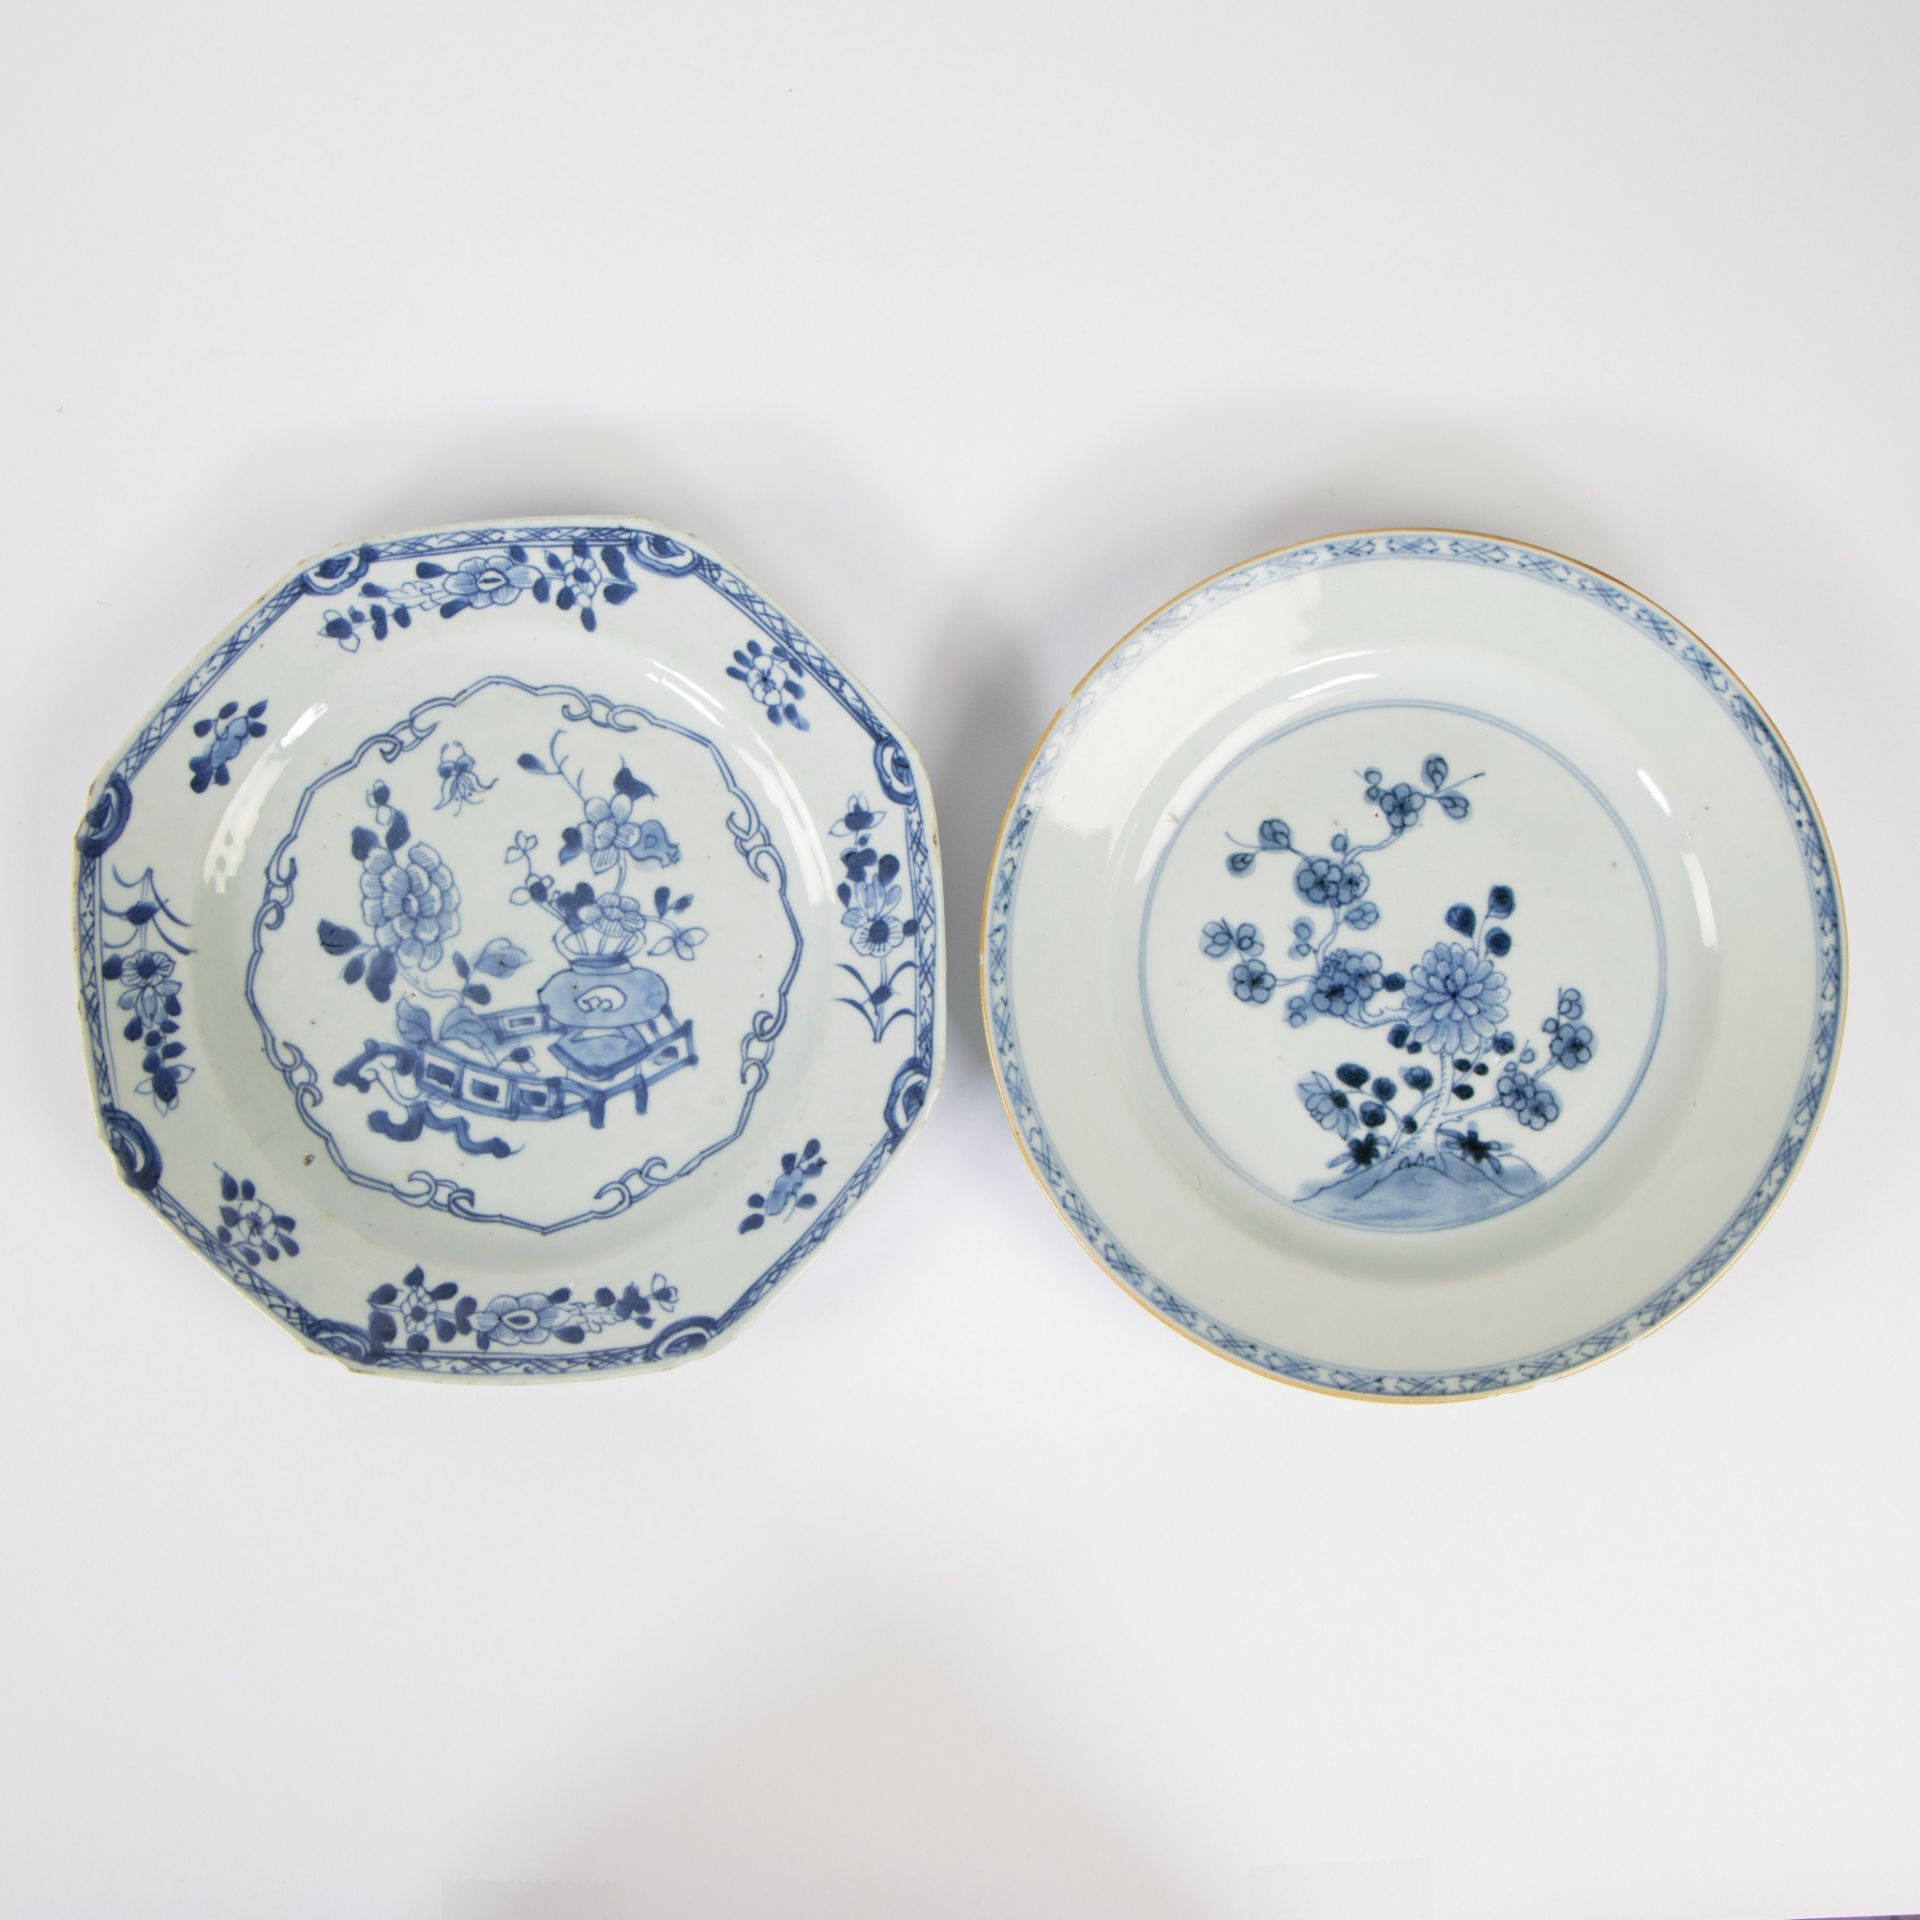 A set of Chinese batavia brown cups and saucers, one Imari cup and 2 plates blue/white, 18th C. - Image 2 of 11